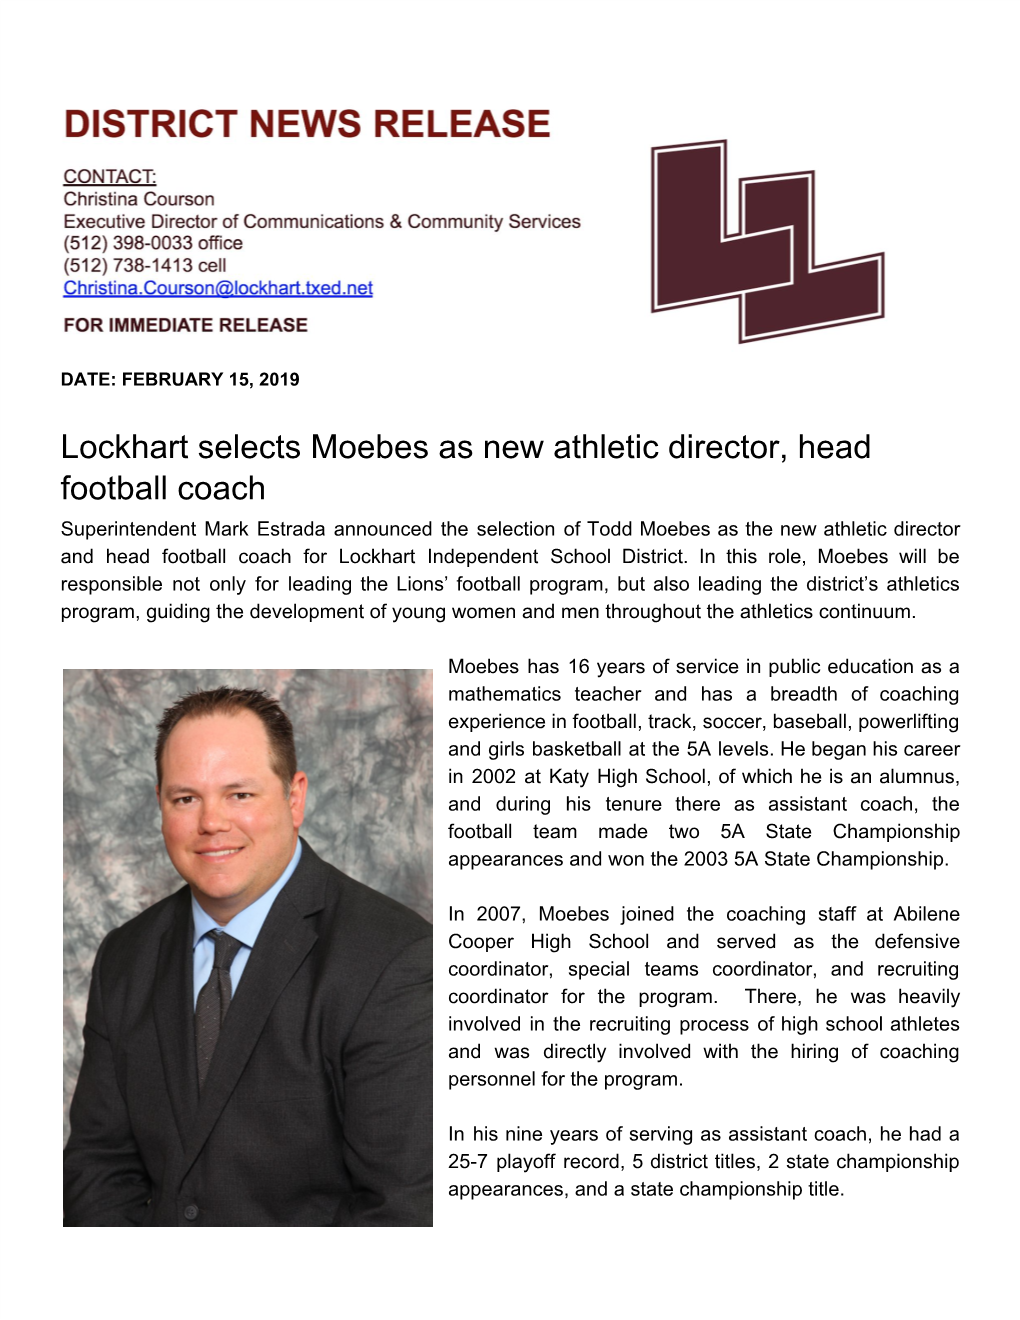 Lockhart Selects Moebes As New Athletic Director, Head Football Coach